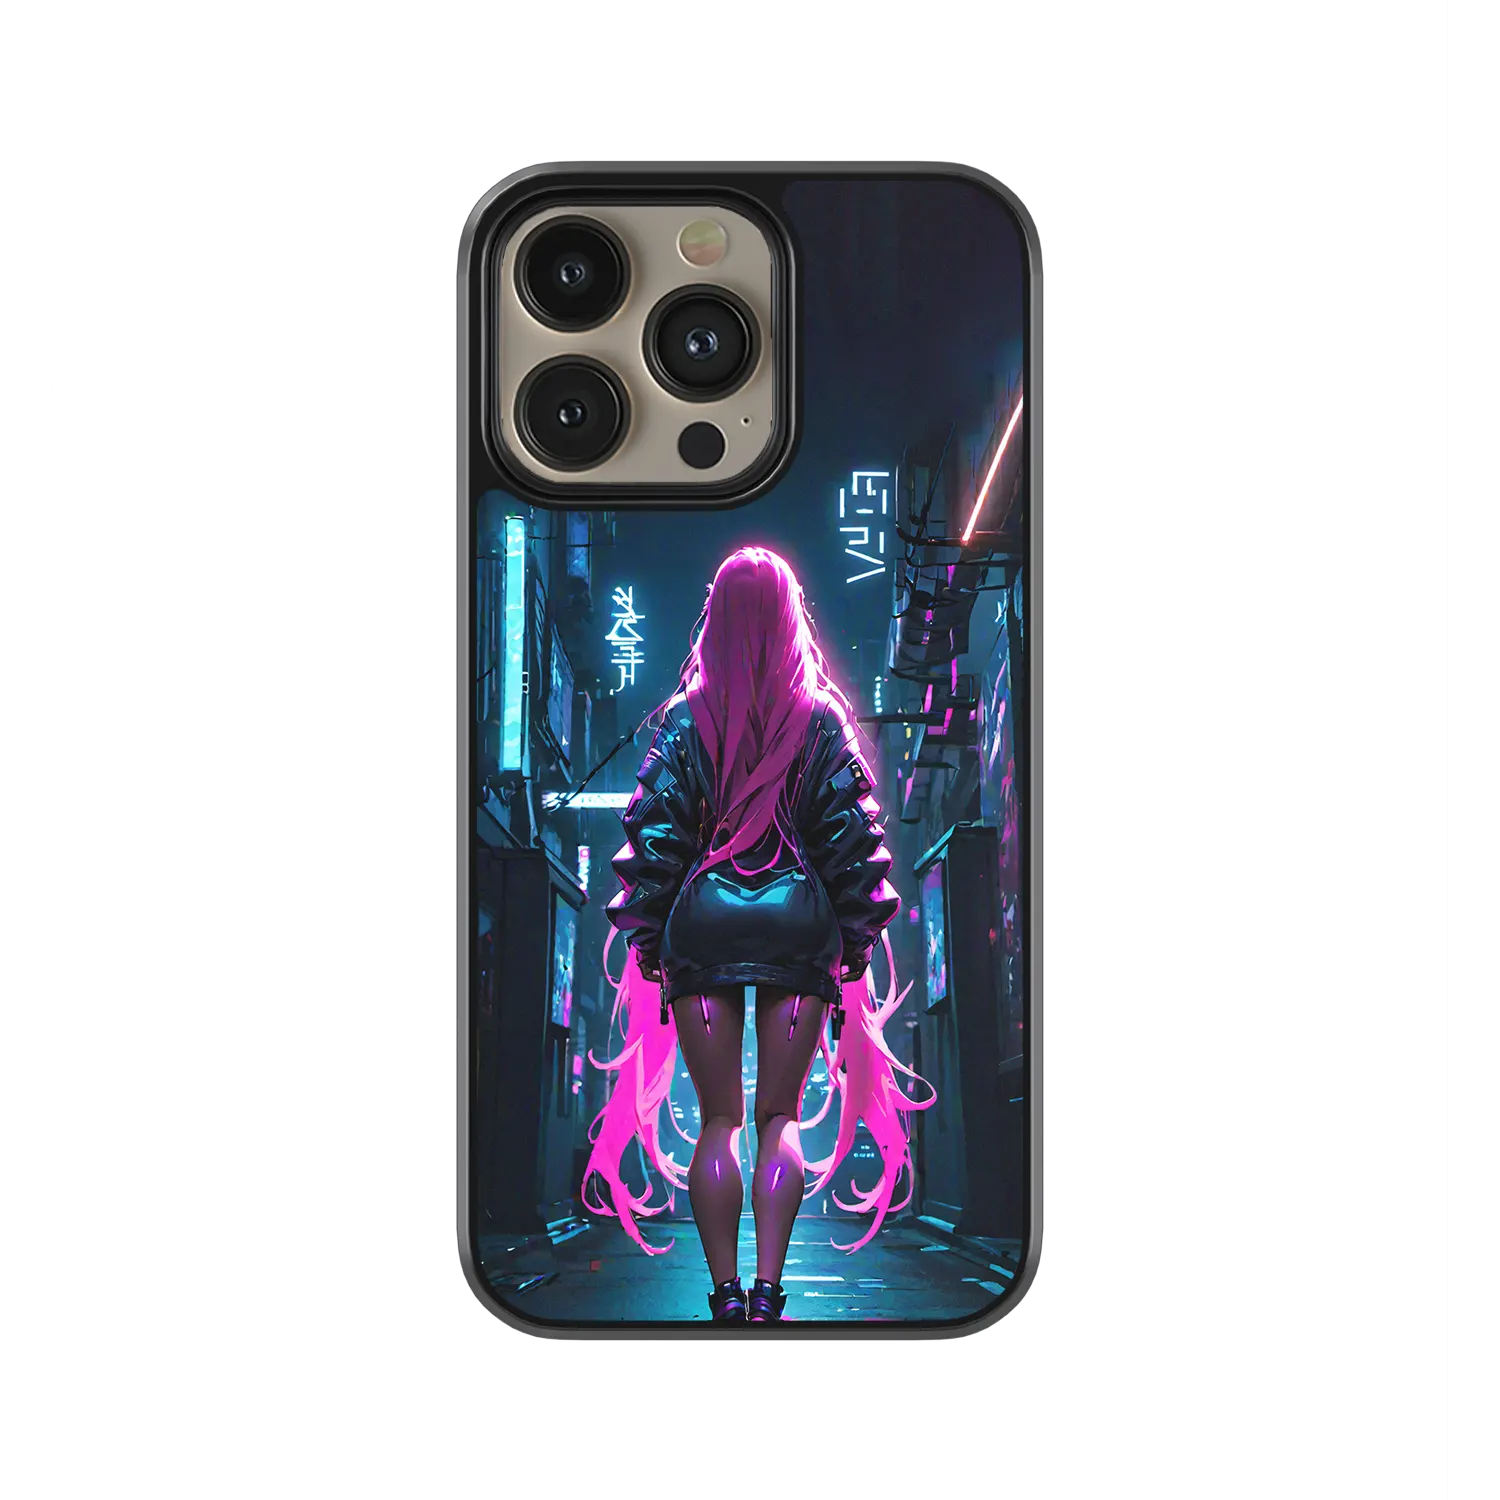 Tokyo Nights iphone 12 pro cover